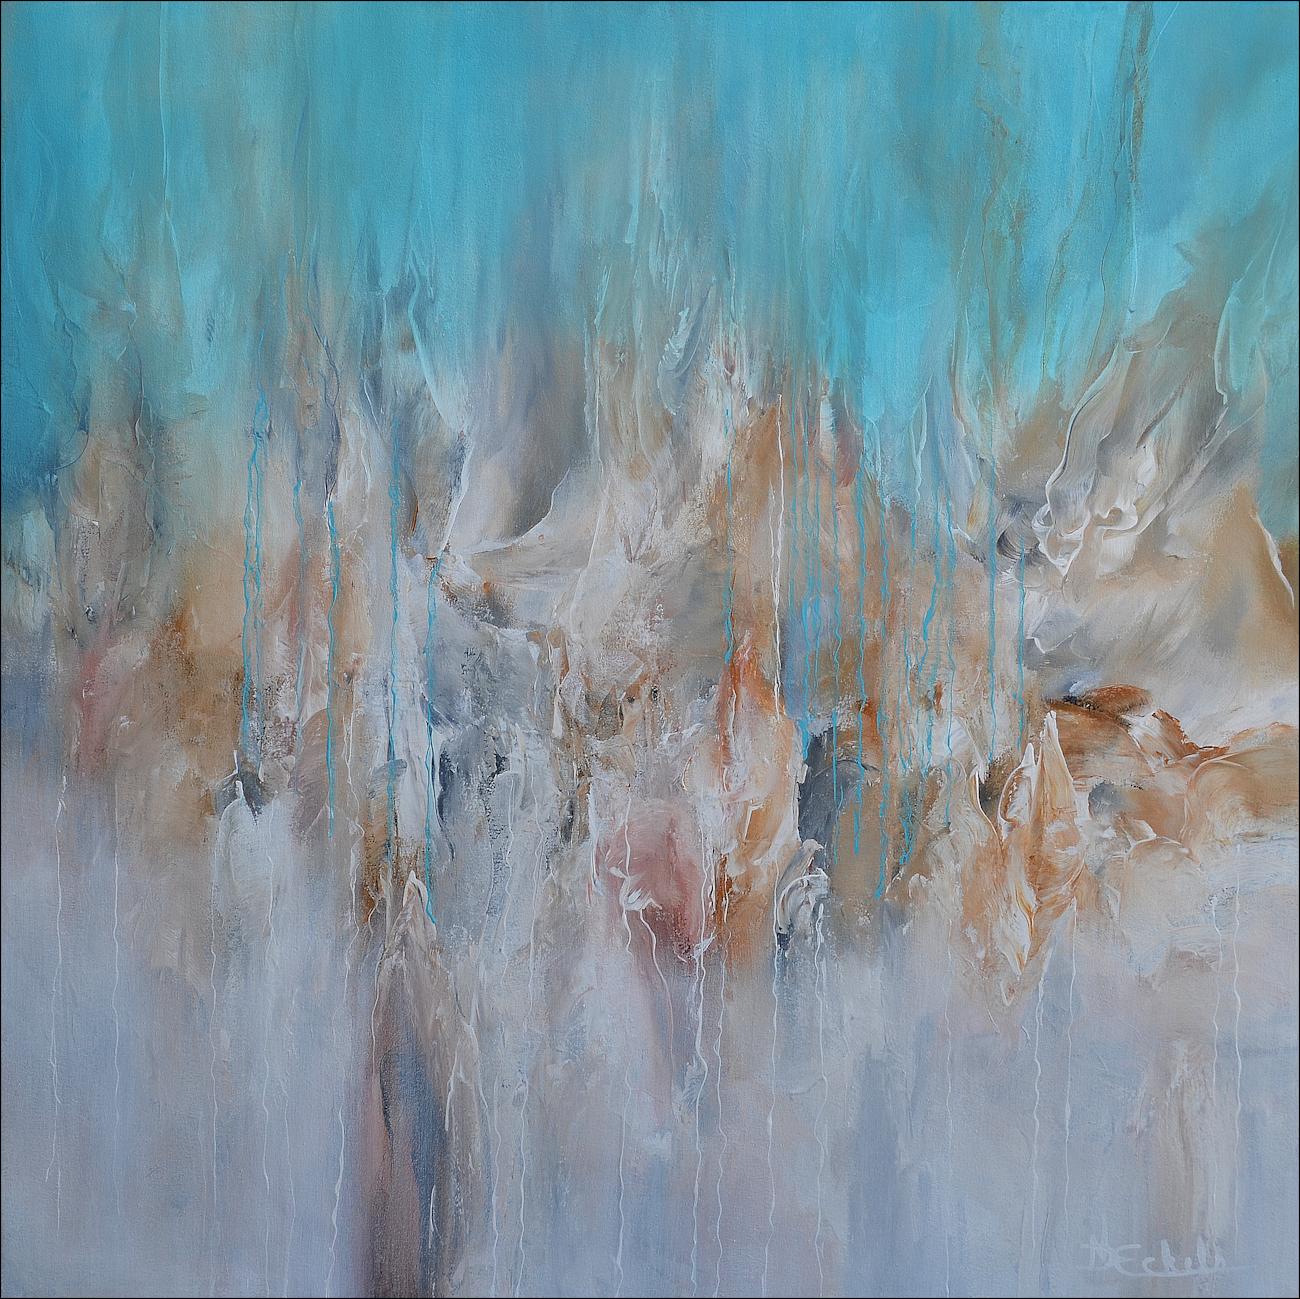 Nancy Eckels Abstract Painting - "Water World" Mixed Media abstract with luminous blues, grays, and lavenders